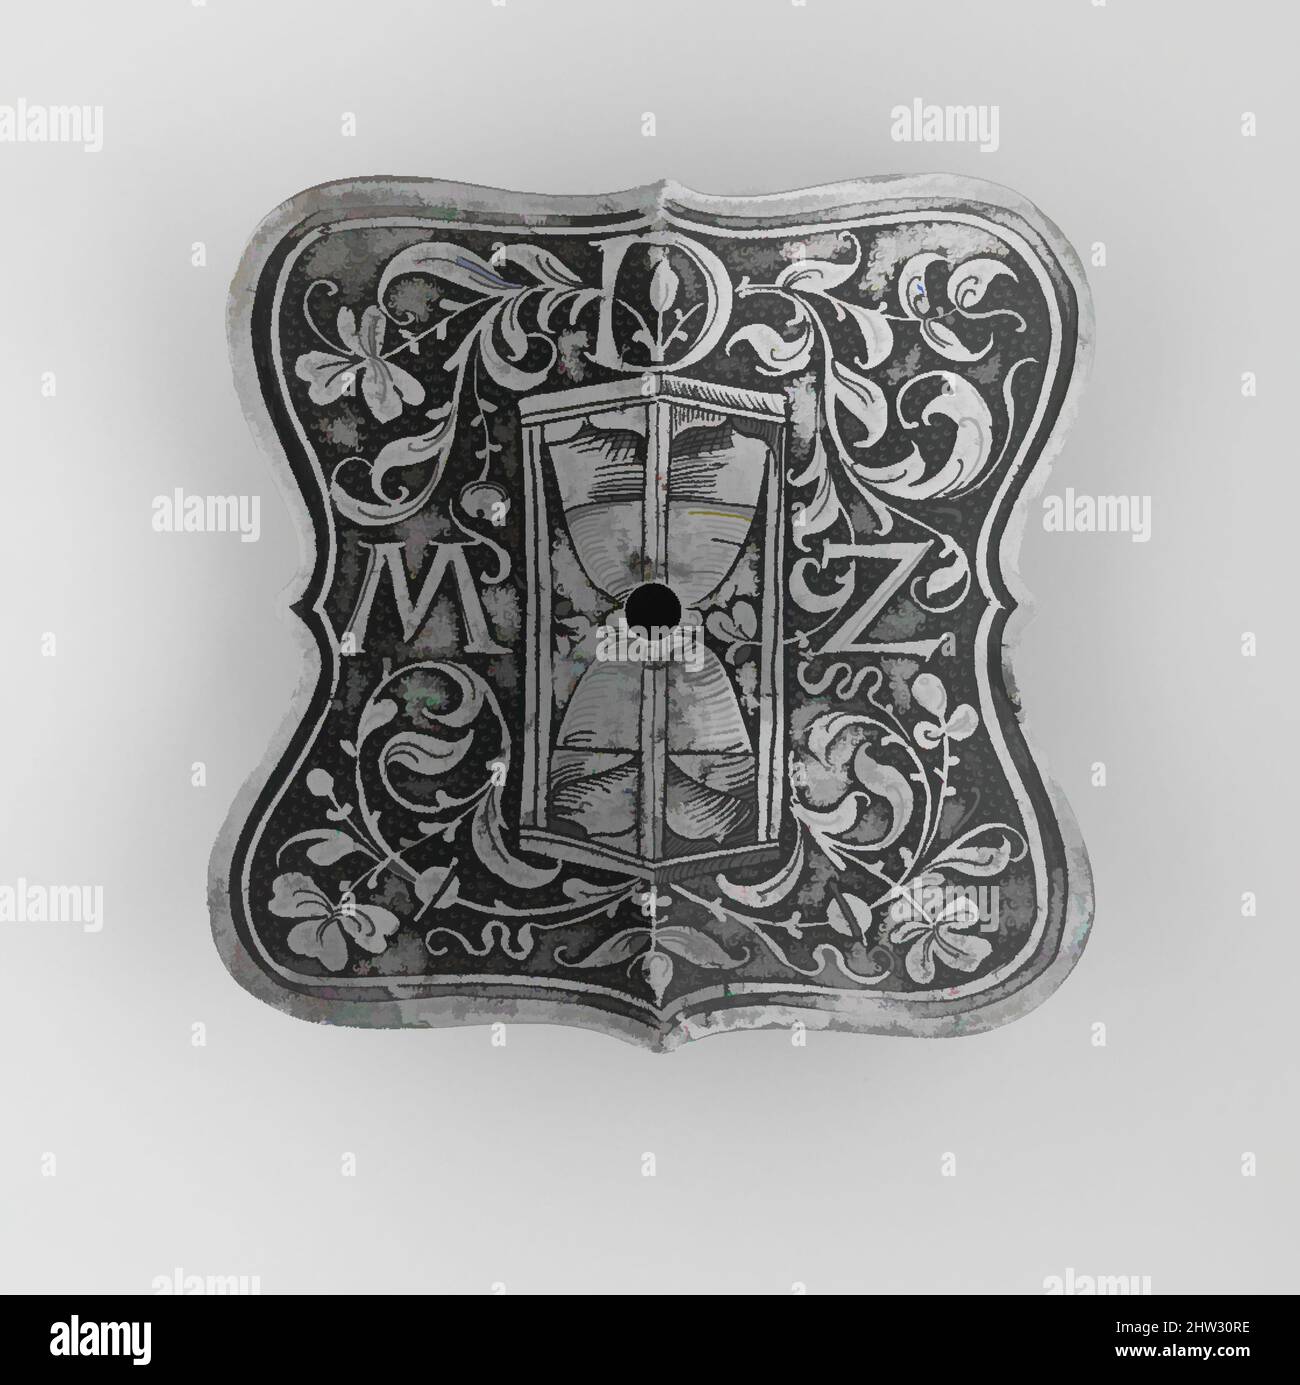 Art inspired by Escutcheon Plate with the Device of Ottheinrich, Count Palatine of the Rhine (1502–1559), ca. 1525, Augsburg, German, Augsburg, Steel, H. 5 1/4 in. (13.2 cm); W. 5 3/8 in. (13.7 cm); Wt. 3 oz. (93 g), Equestrian Equipment-Shaffrons, Initially intended to reinforce the, Classic works modernized by Artotop with a splash of modernity. Shapes, color and value, eye-catching visual impact on art. Emotions through freedom of artworks in a contemporary way. A timeless message pursuing a wildly creative new direction. Artists turning to the digital medium and creating the Artotop NFT Stock Photo